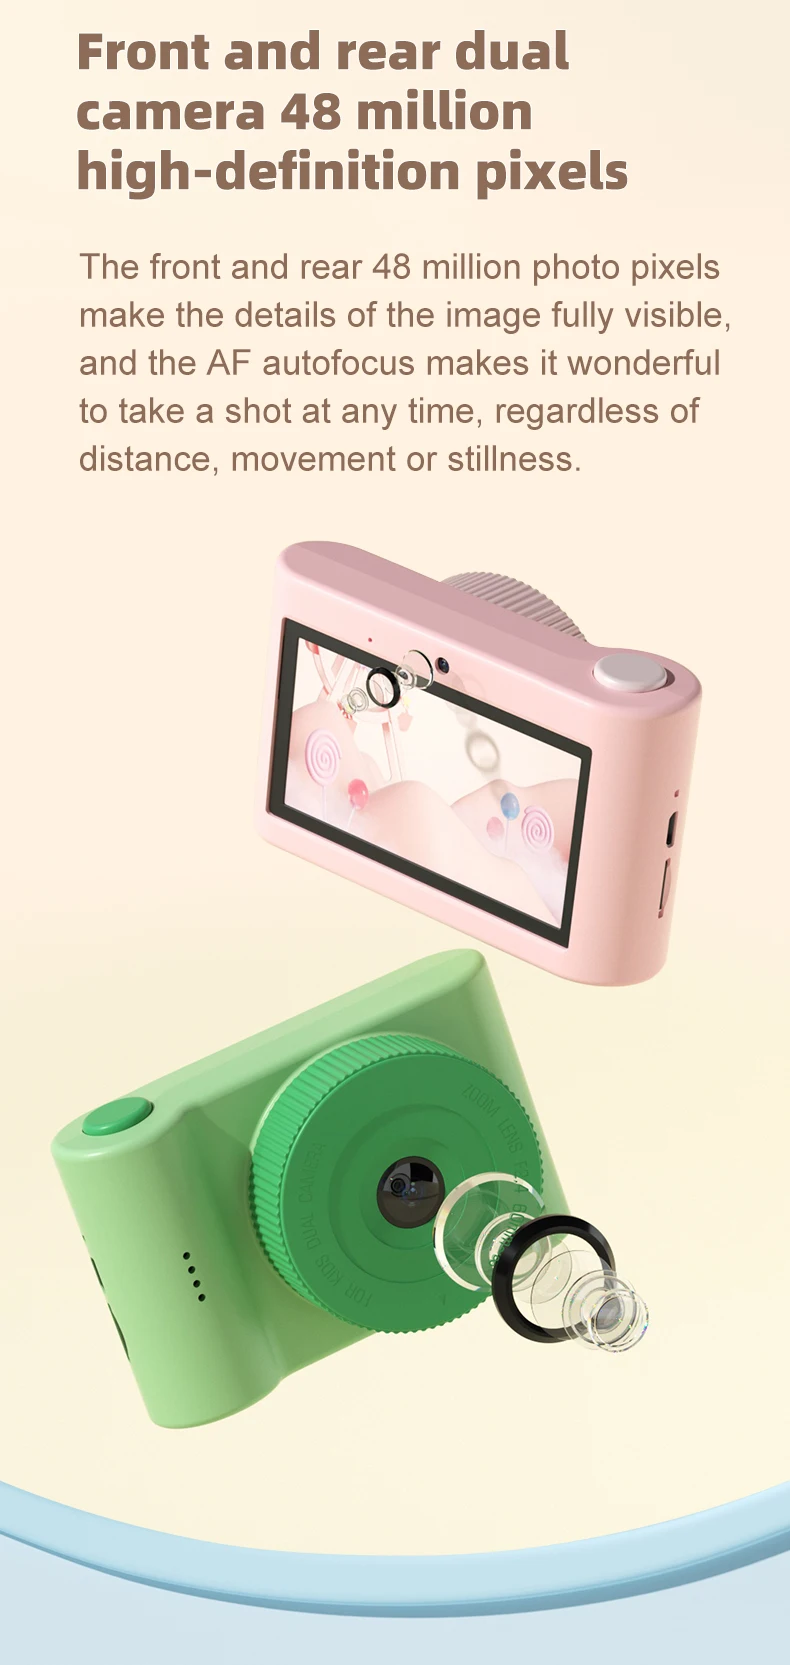 Kids Digital Camera 1080p Photo Video Camera Children 3.0 Inch Touch Screen Camcorder Cameras 48M Pixels Cute Toy Christmas Gift